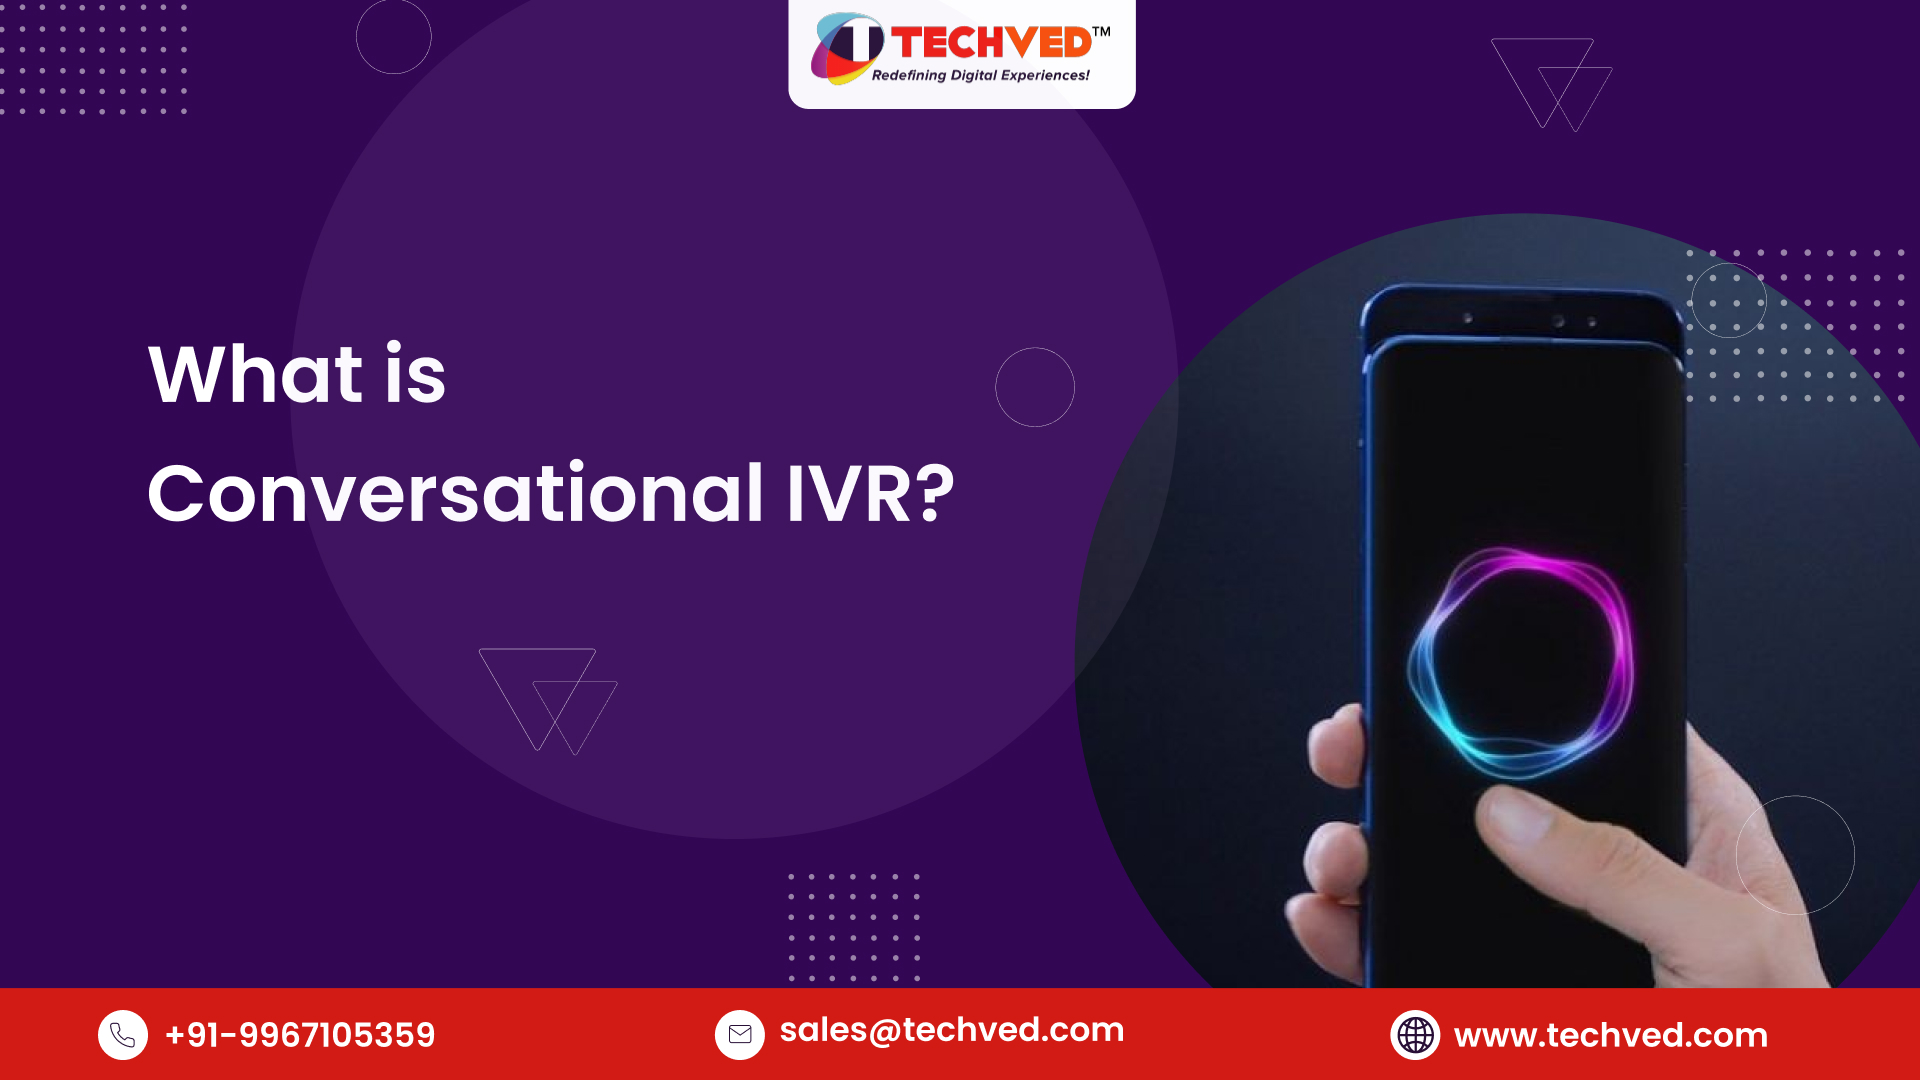 What is Conversational IVR?